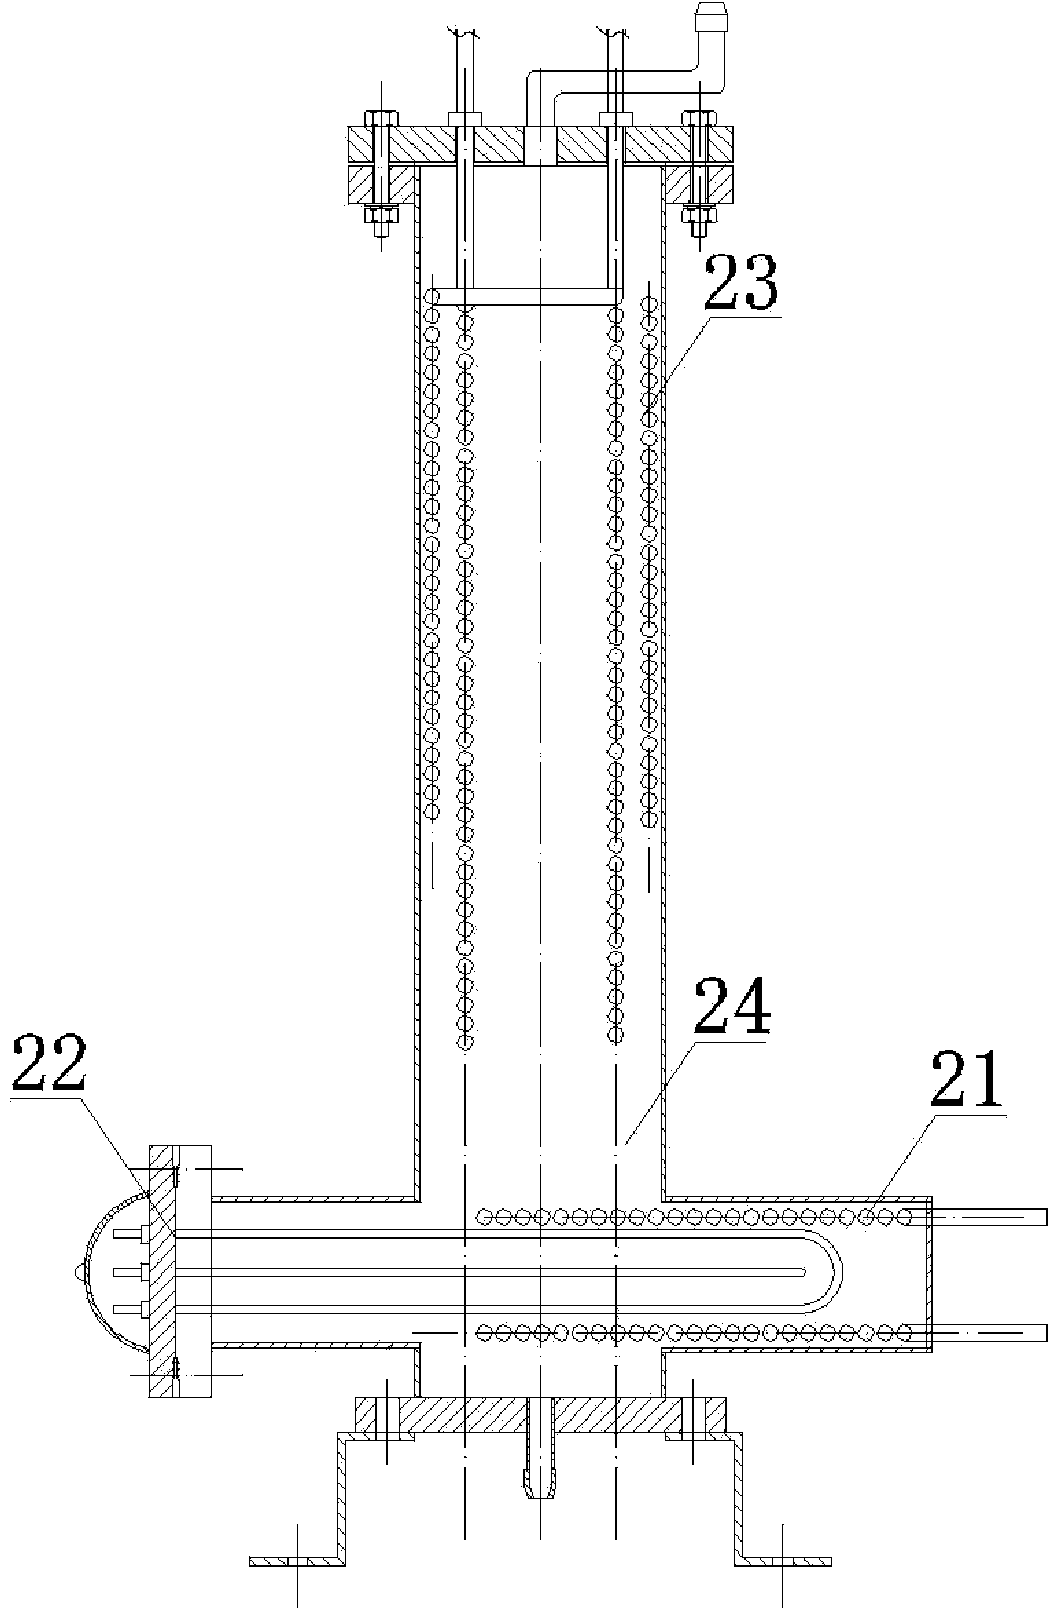 Refrigerator heat exchanger performance measurement and control device